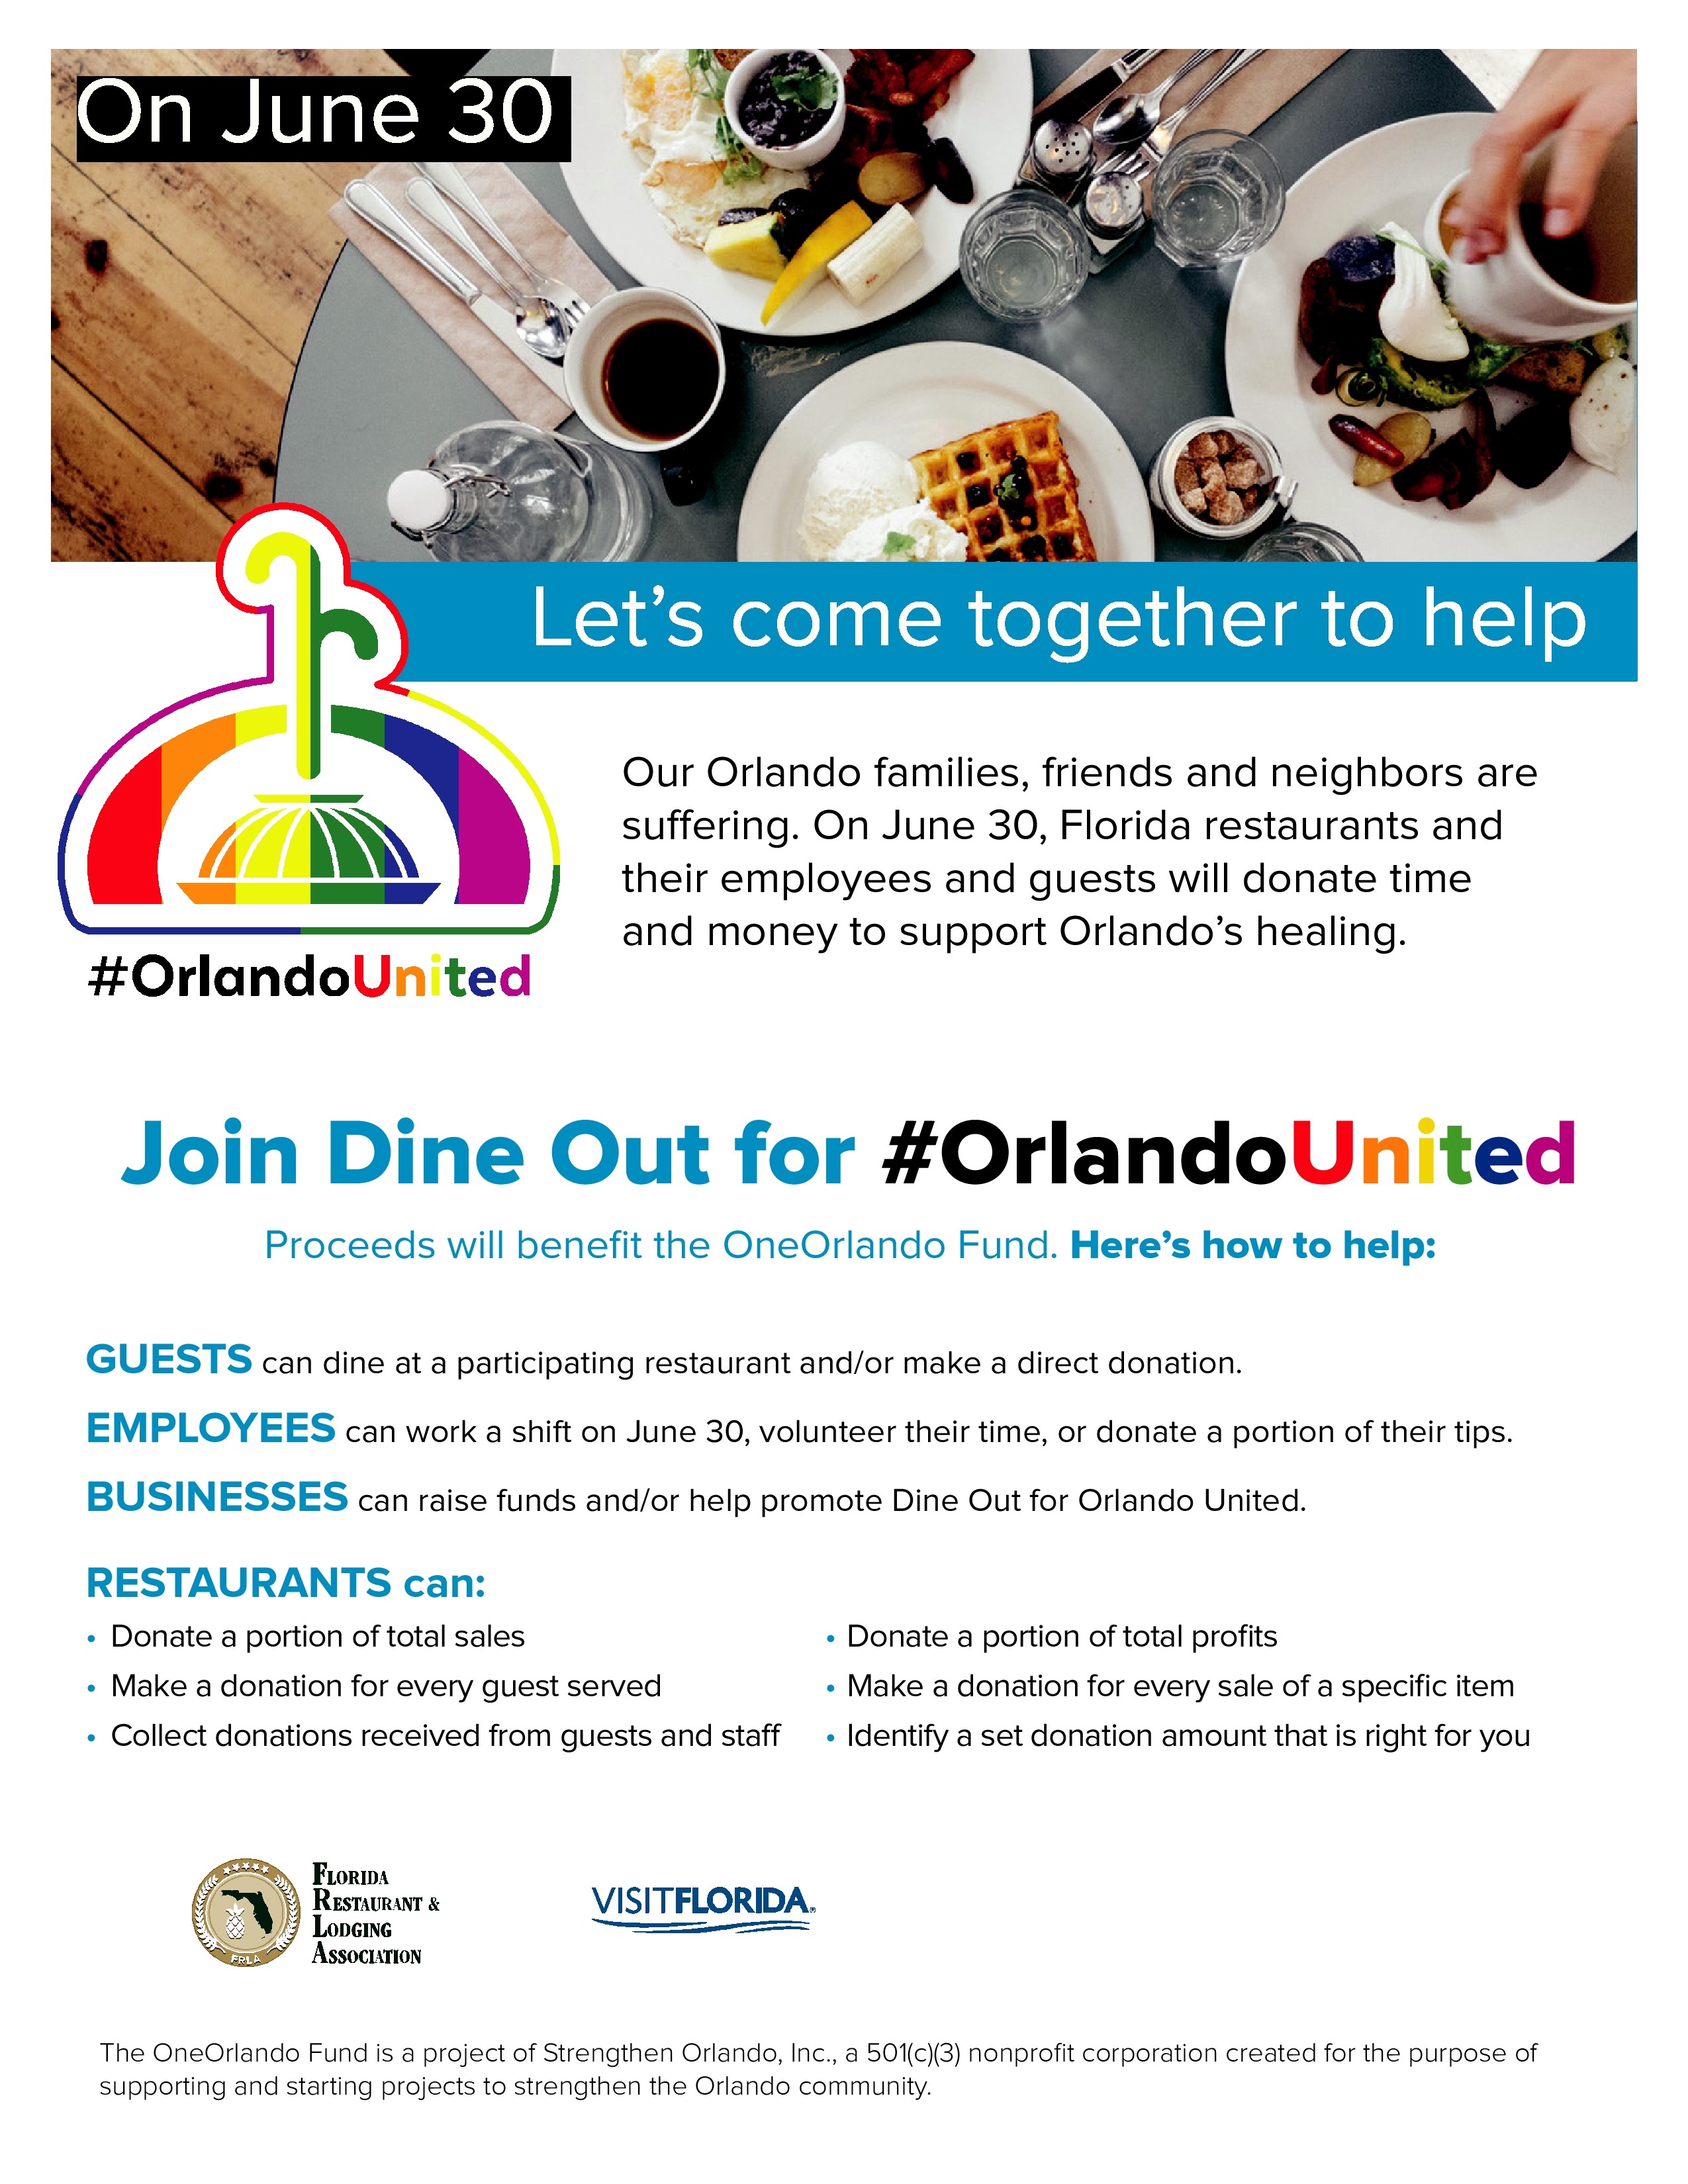 dine-out-for-orlandounited-001